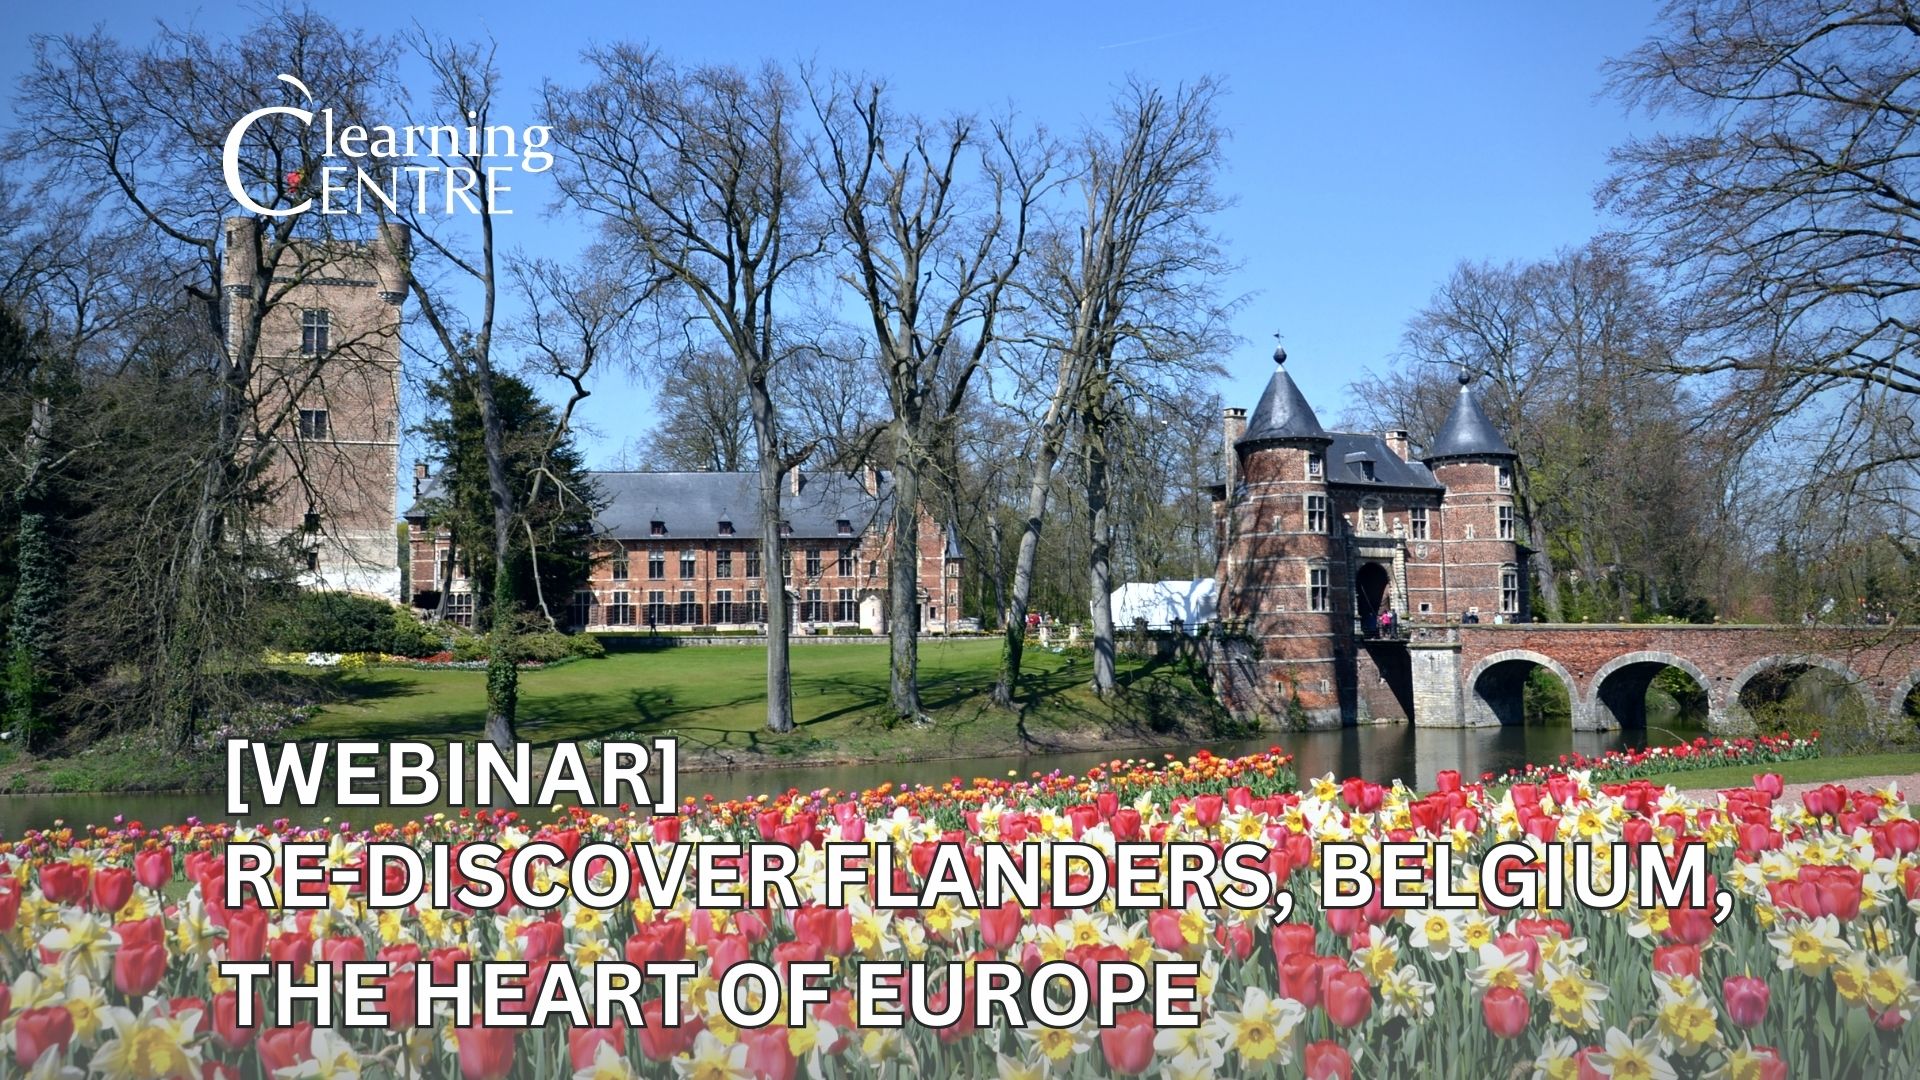 Re-discover Flanders, Belgium, The Heart Of Europe